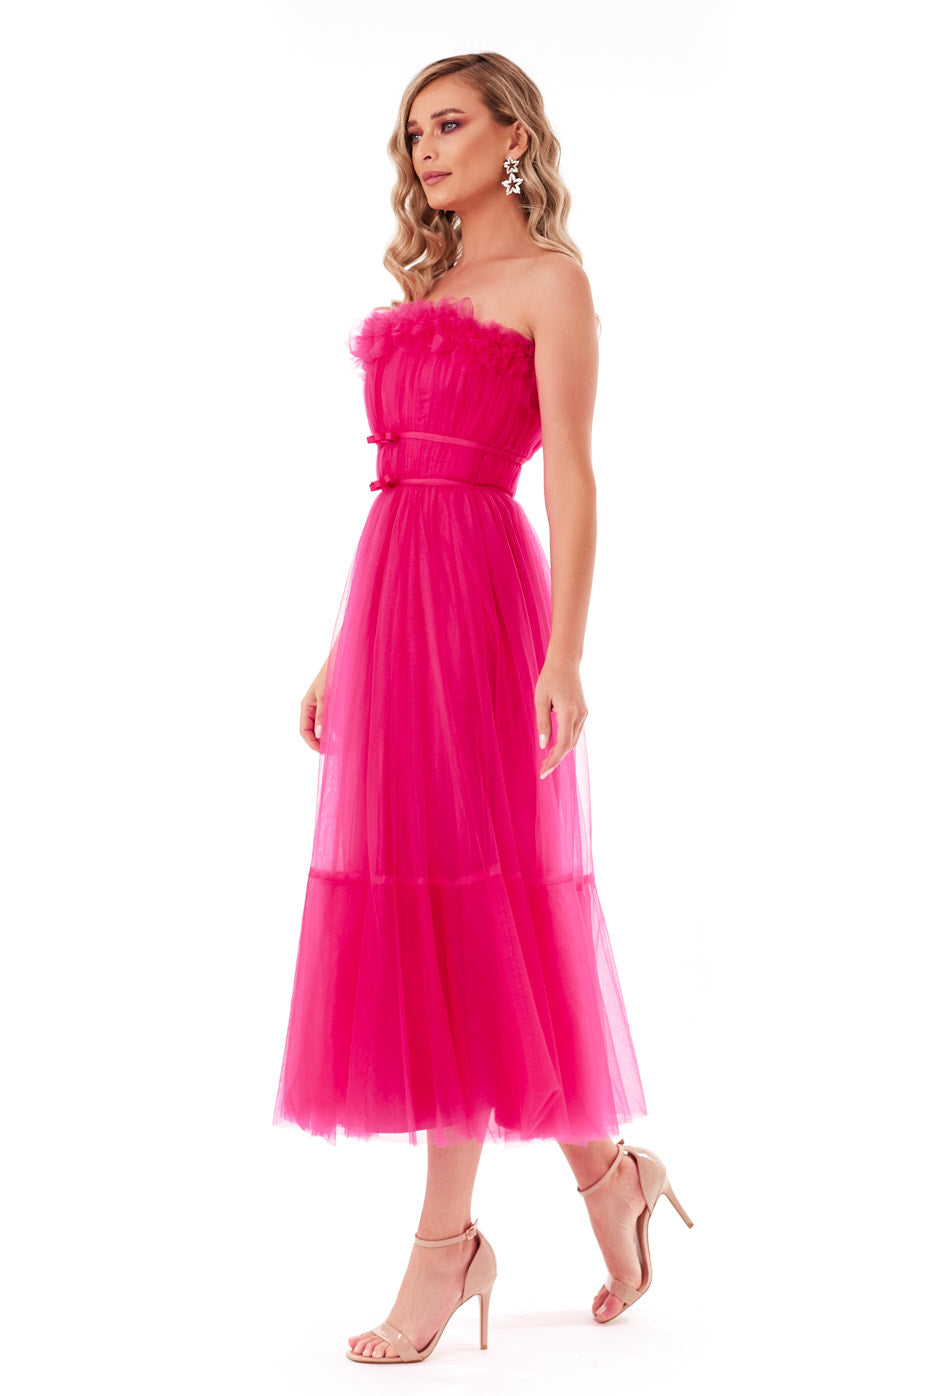 Rochie Tip Corset Din Tulle